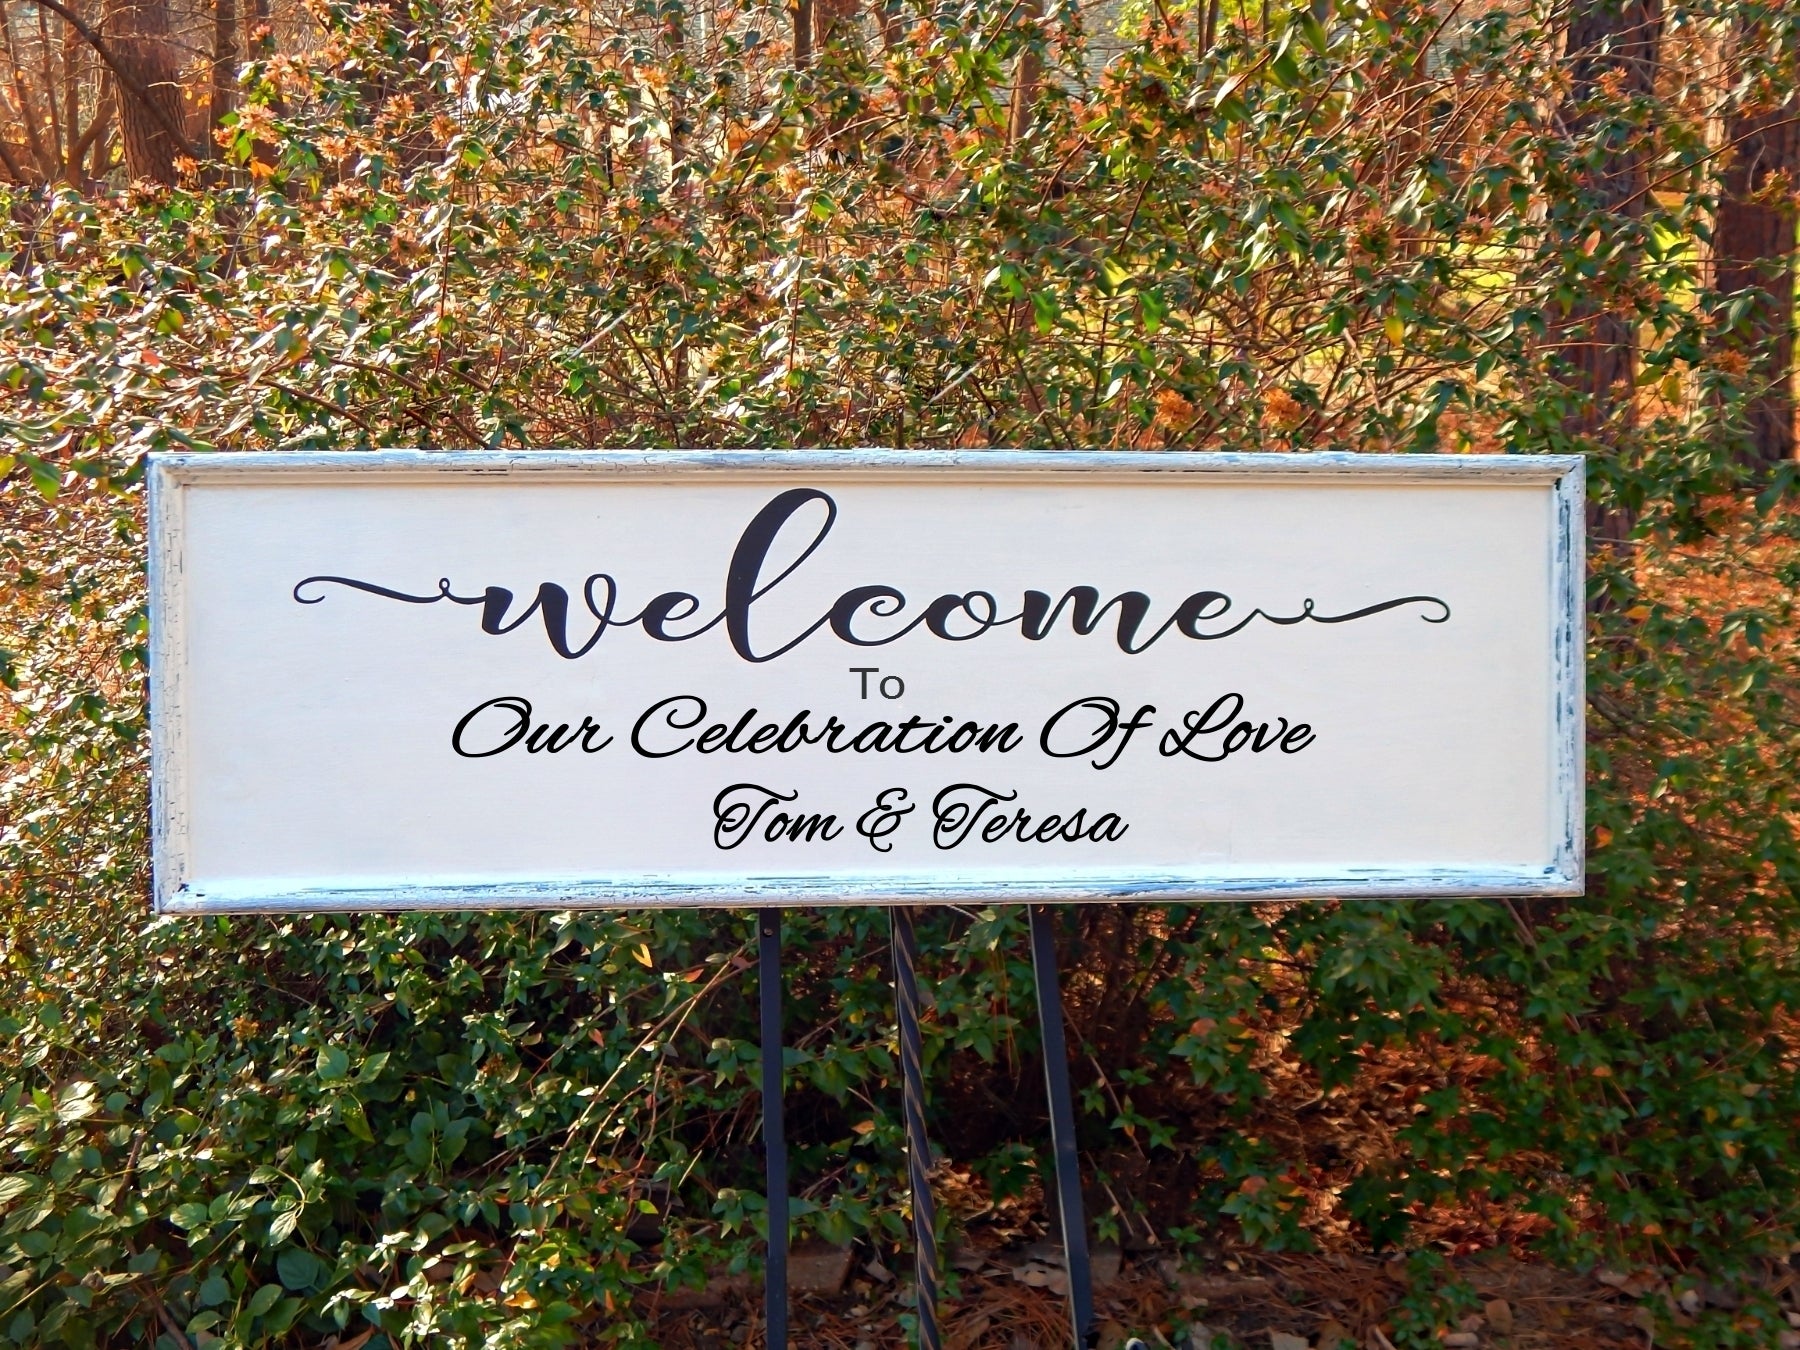 Wedding Gift, Welcome Signs, Rustic Wedding Decor, Distressed White Sign, Real Wood Sign, Wedding Signs Decorations, Welcome To Our Celebration - Unity Braids